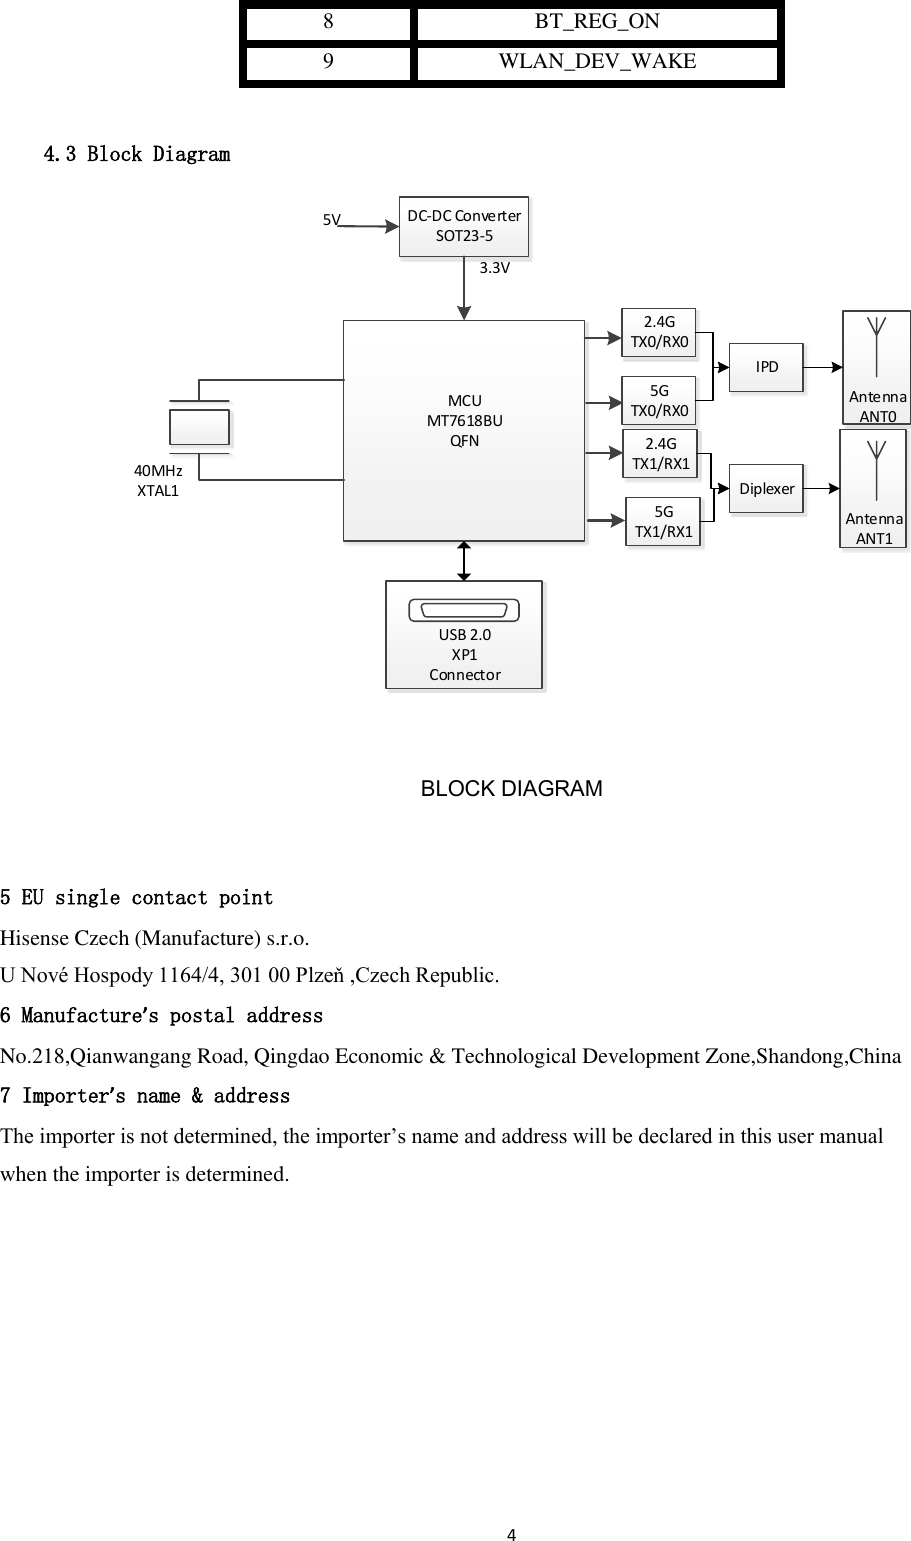 4  8 BT_REG_ON 9 WLAN_DEV_WAKE  4.3 Block Diagram USB 2.0XP1ConnectorDC-DC ConverterSOT23-5MCUMT7618BUQFN5V 3.3V40MHzXTAL12.4G TX0/RX0                       Antenna                        ANT0                       Antenna                        ANT15G TX0/RX0IPD2.4G TX1/RX15G TX1/RX1Diplexer BLOCK DIAGRAM 5 EU single contact point Hisense Czech (Manufacture) s.r.o. U Nové Hospody 1164/4, 301 00 Plzeň ,Czech Republic. 6 Manufacture’s postal address No.218,Qianwangang Road, Qingdao Economic &amp; Technological Development Zone,Shandong,China 7 Importer’s name &amp; address The importer is not determined, the importer’s name and address will be declared in this user manual when the importer is determined. 